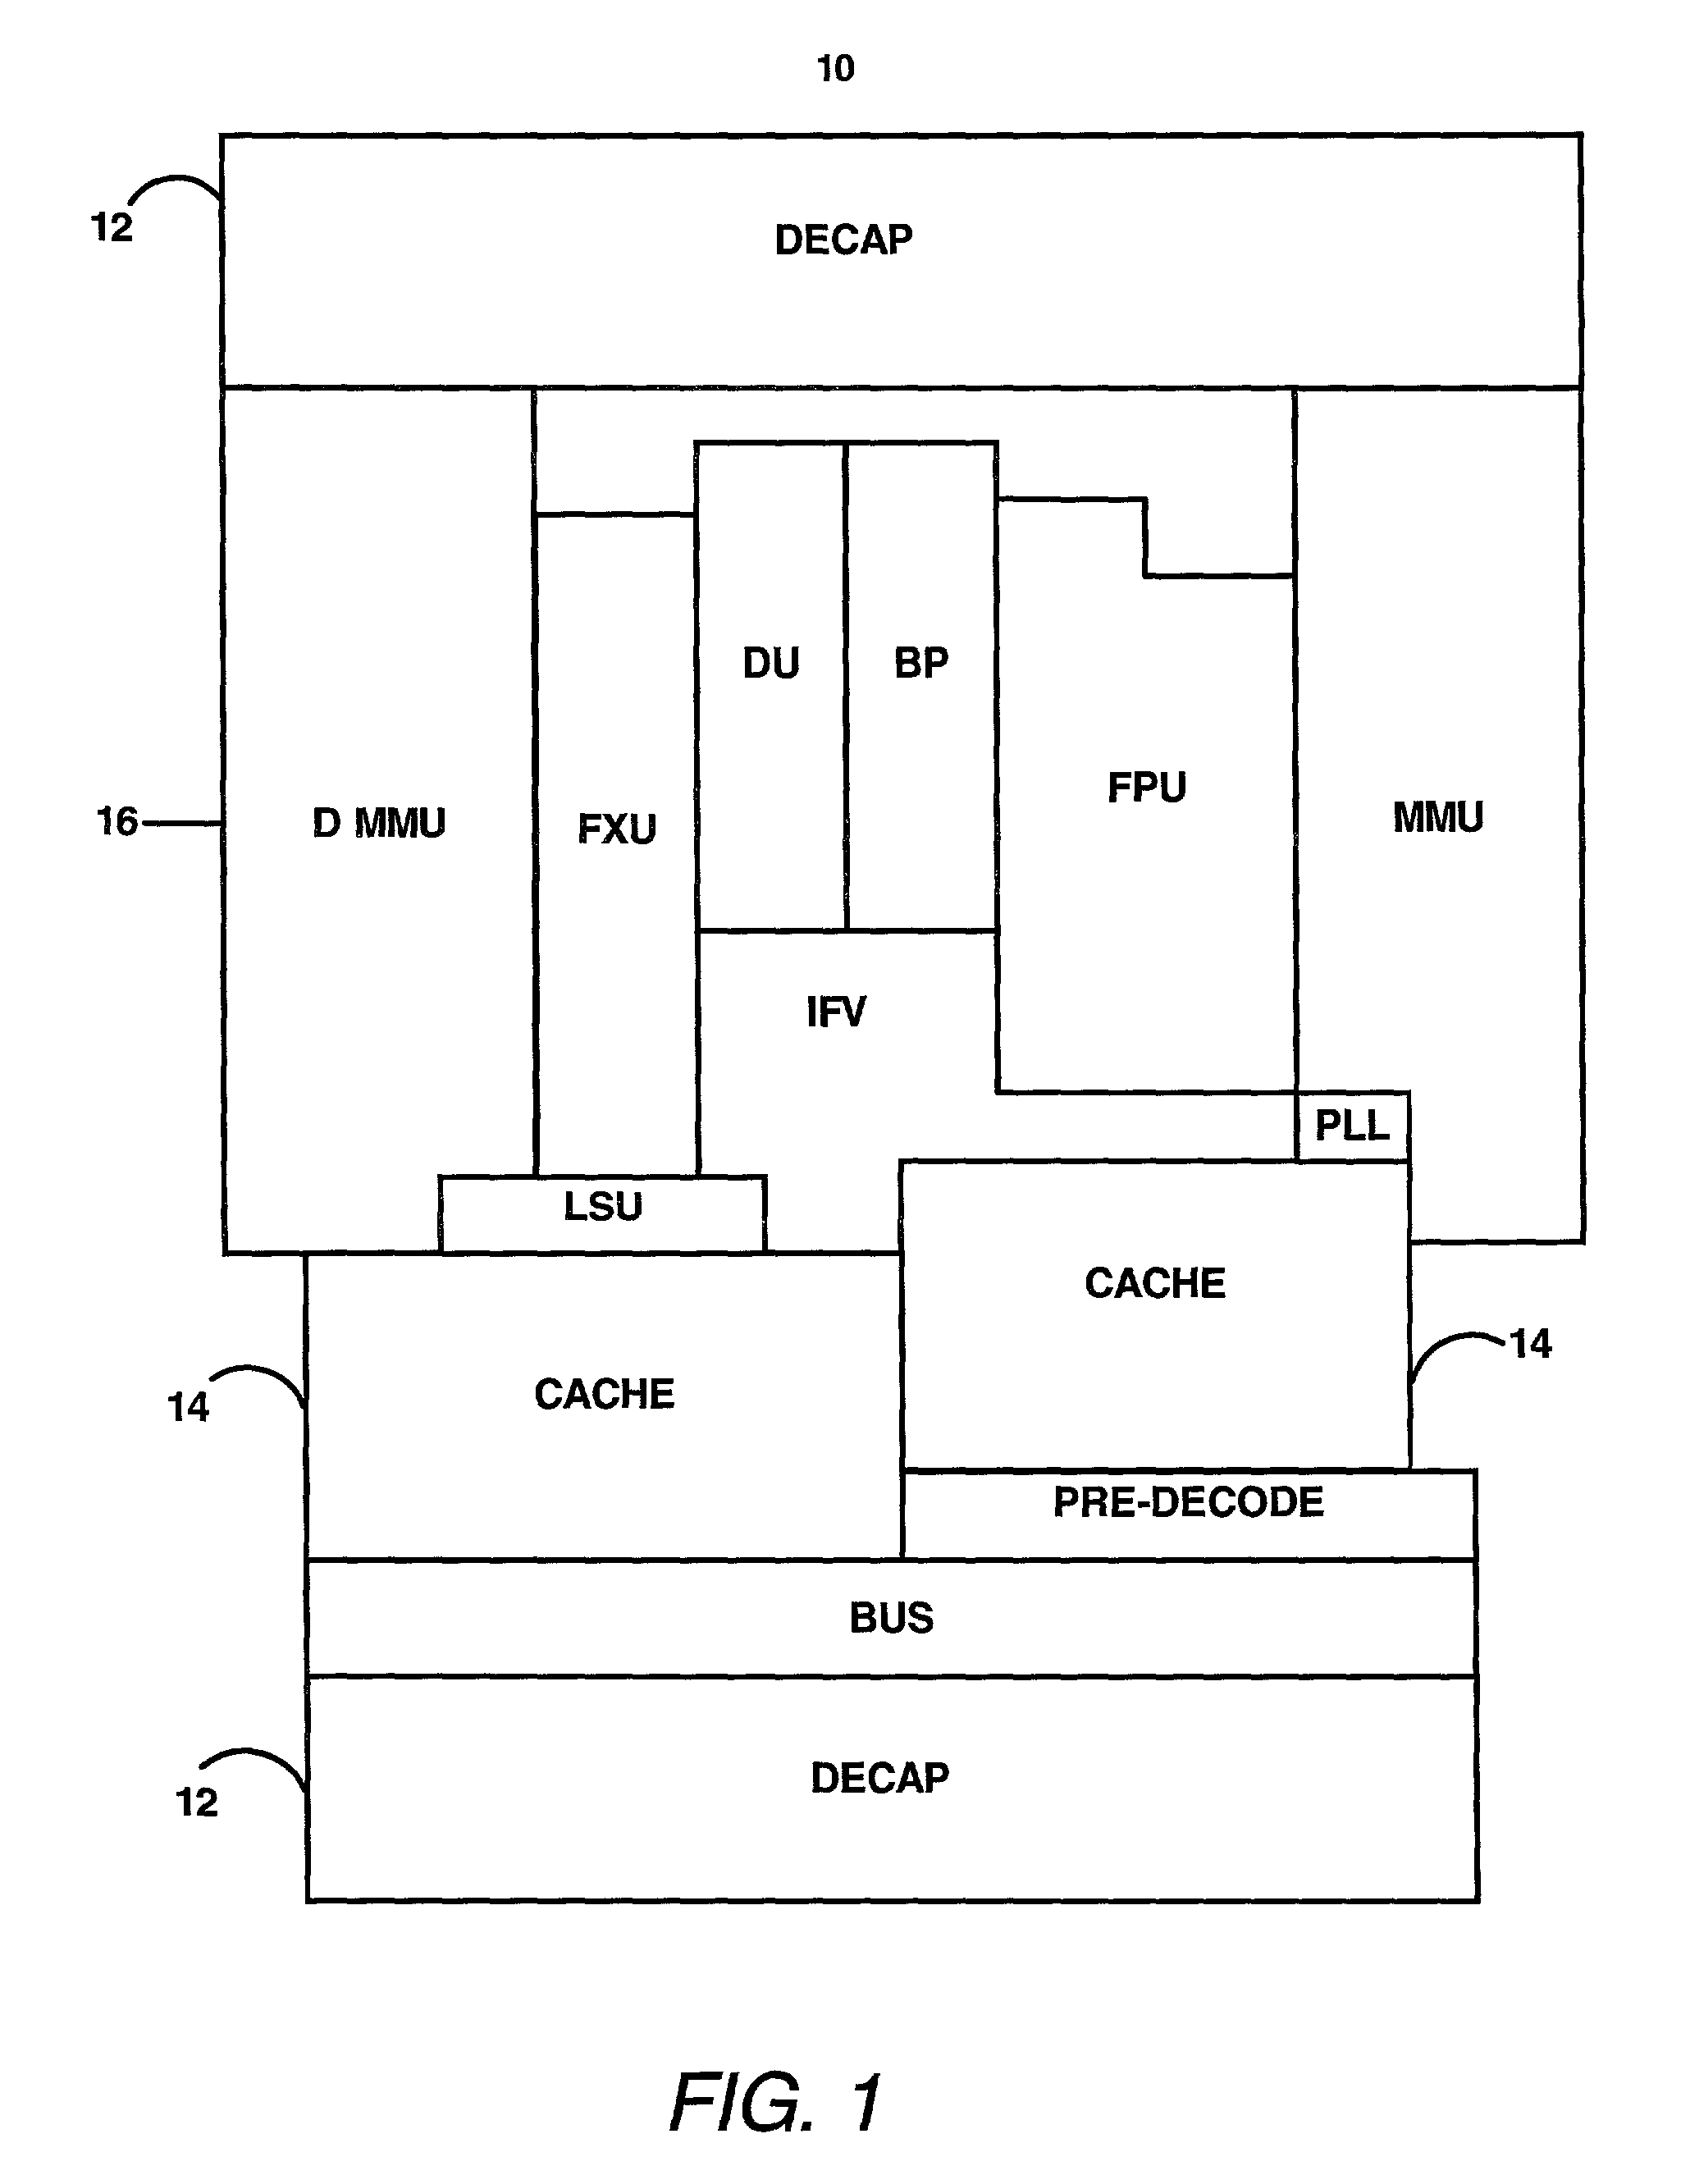 Method and apparatus for building up large scale on chip de-coupling capacitor on standard CMOS/SOI technology